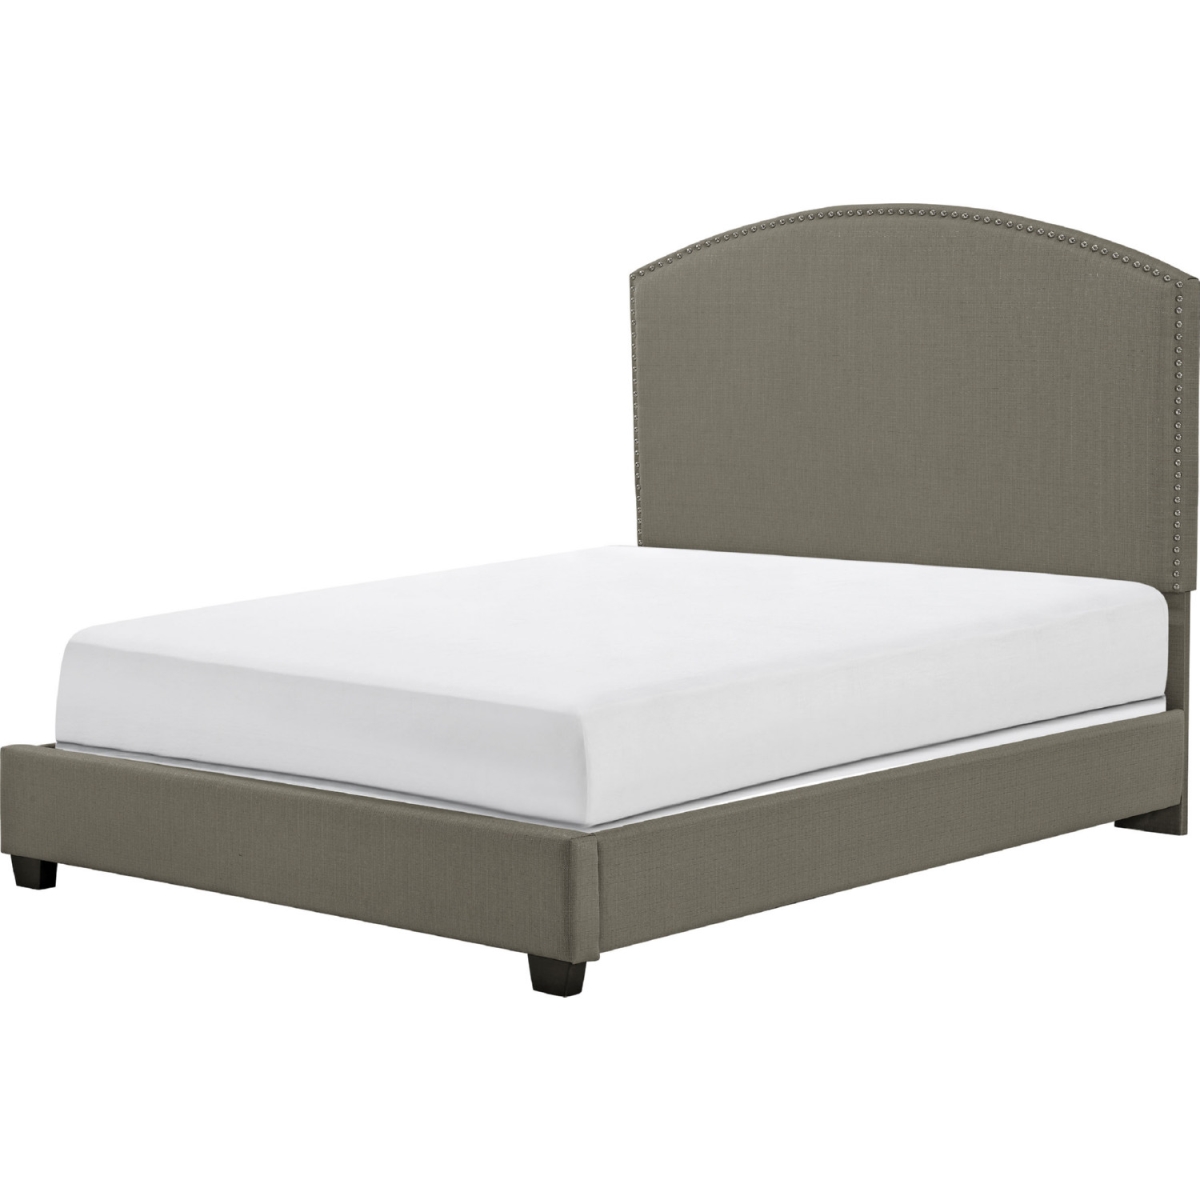 Cassie Curved Upholstered Queen Bedset, Shadow Gray Linen